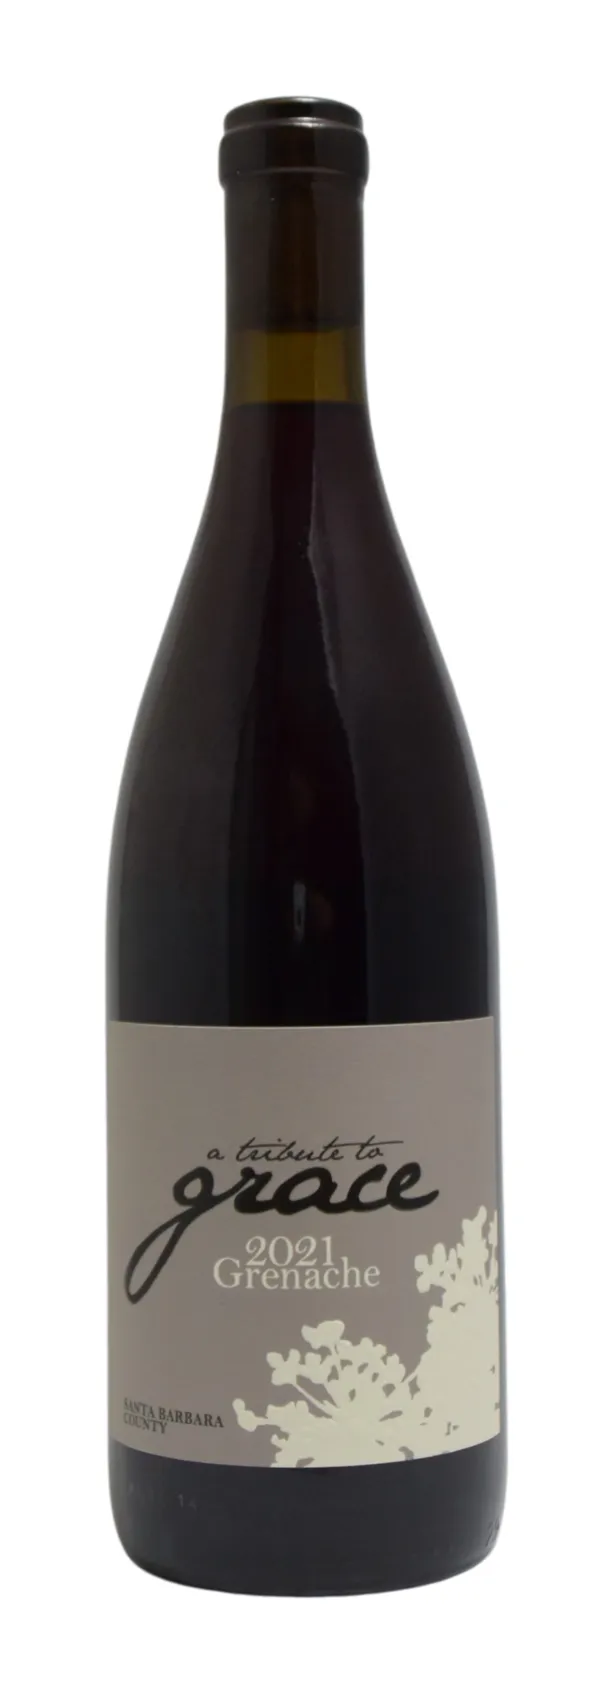 Bottle of A Tribute to Grace Grenache from search results